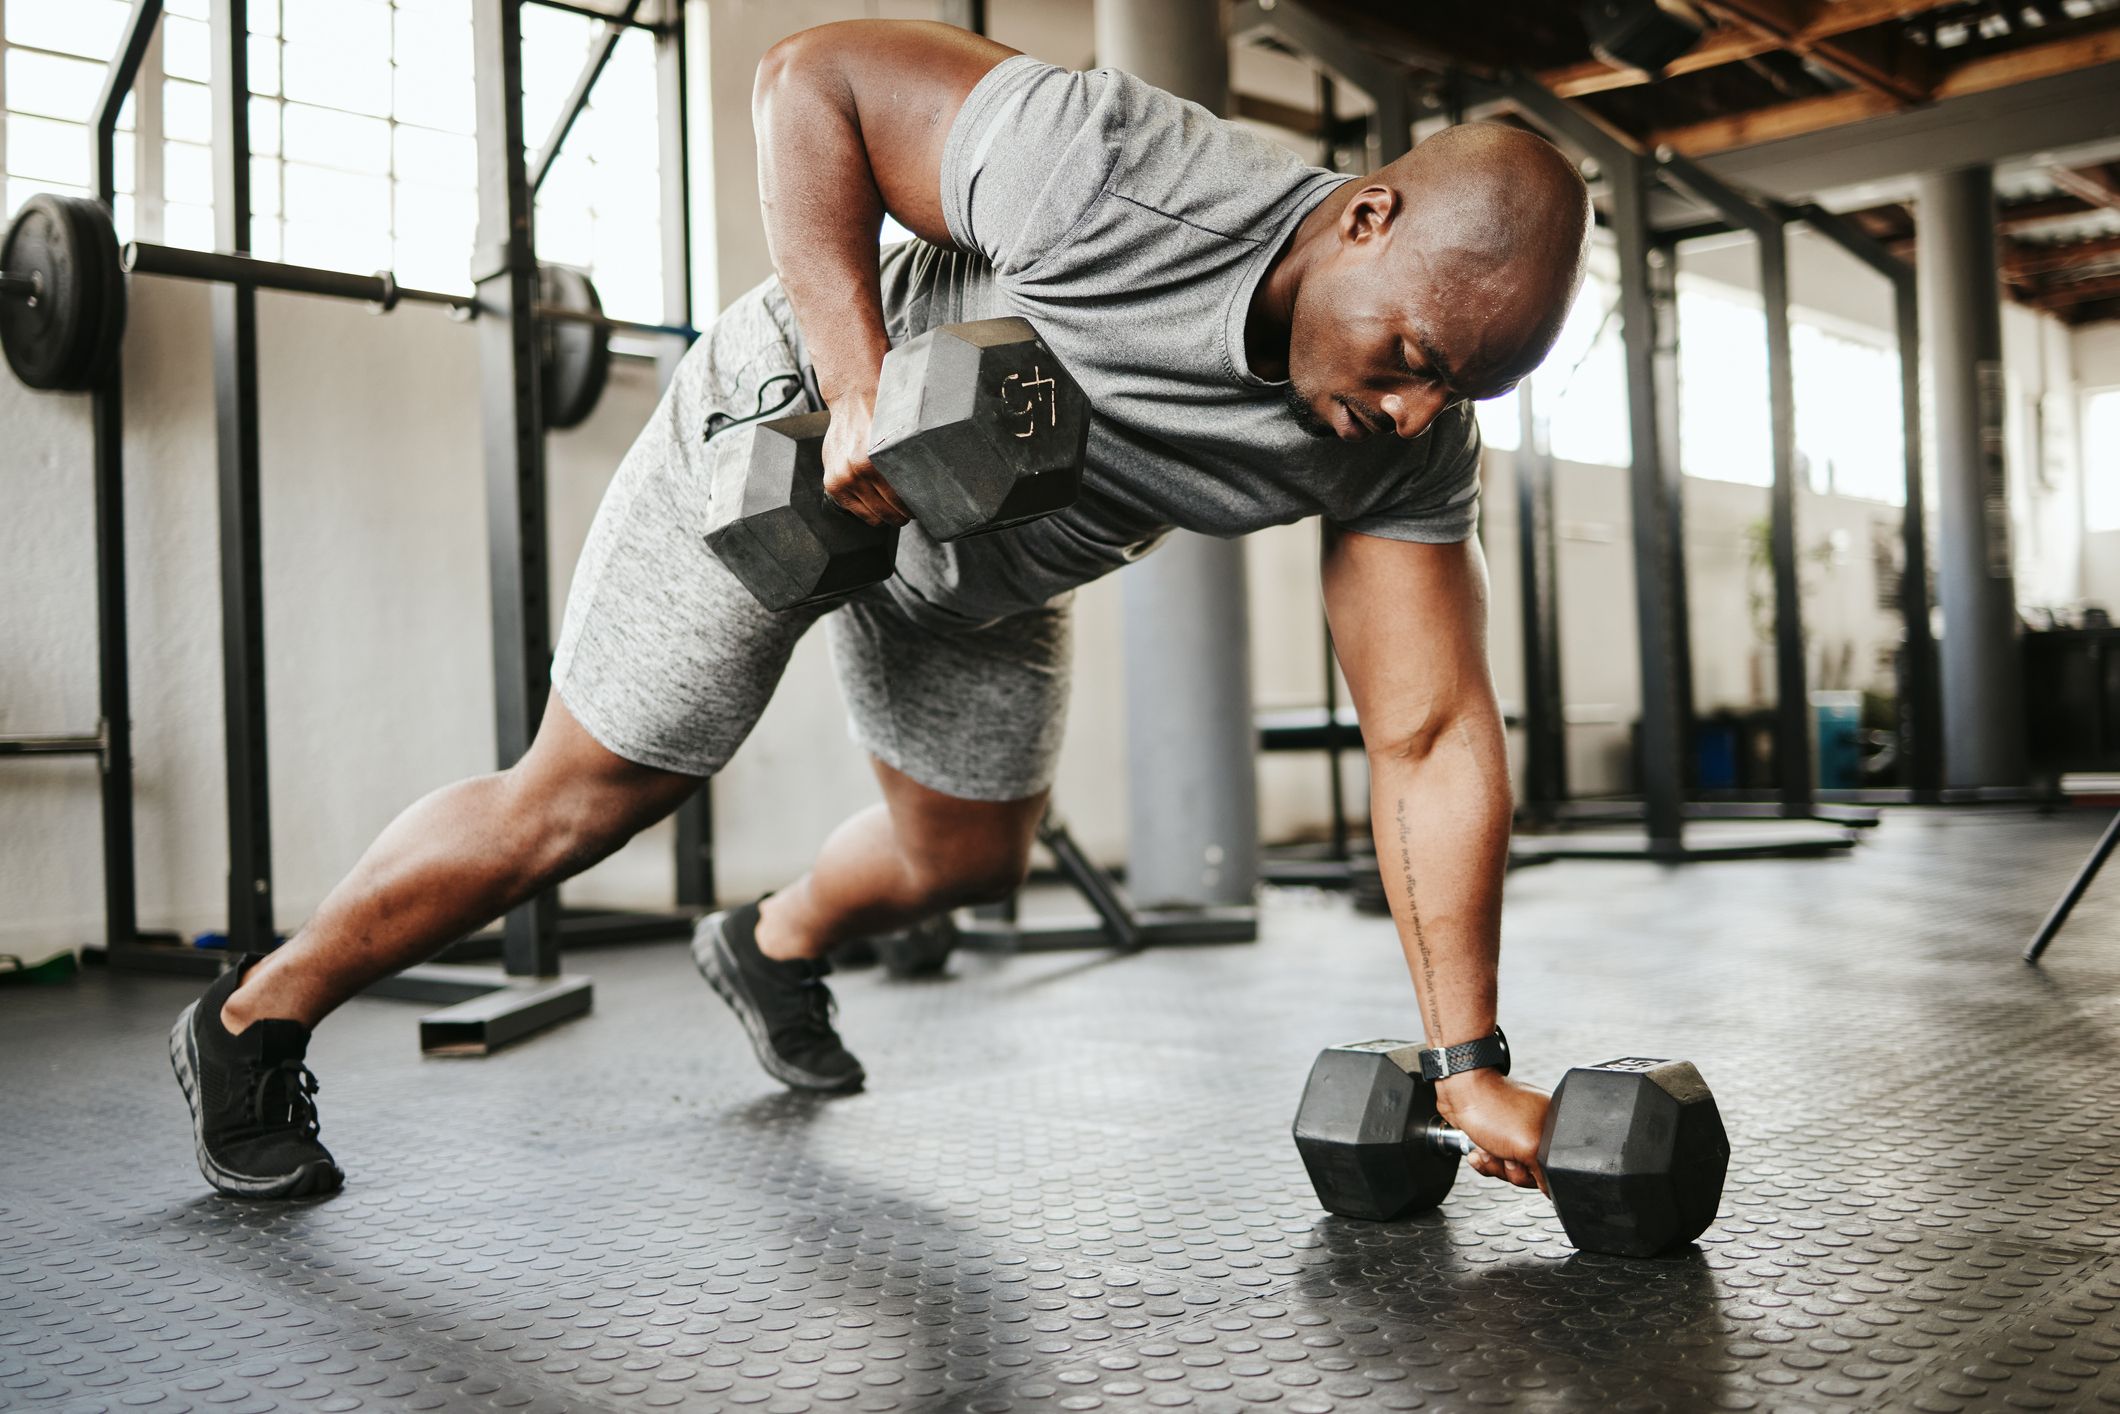 Resistance Training: The Benefits, the Science and Getting Started